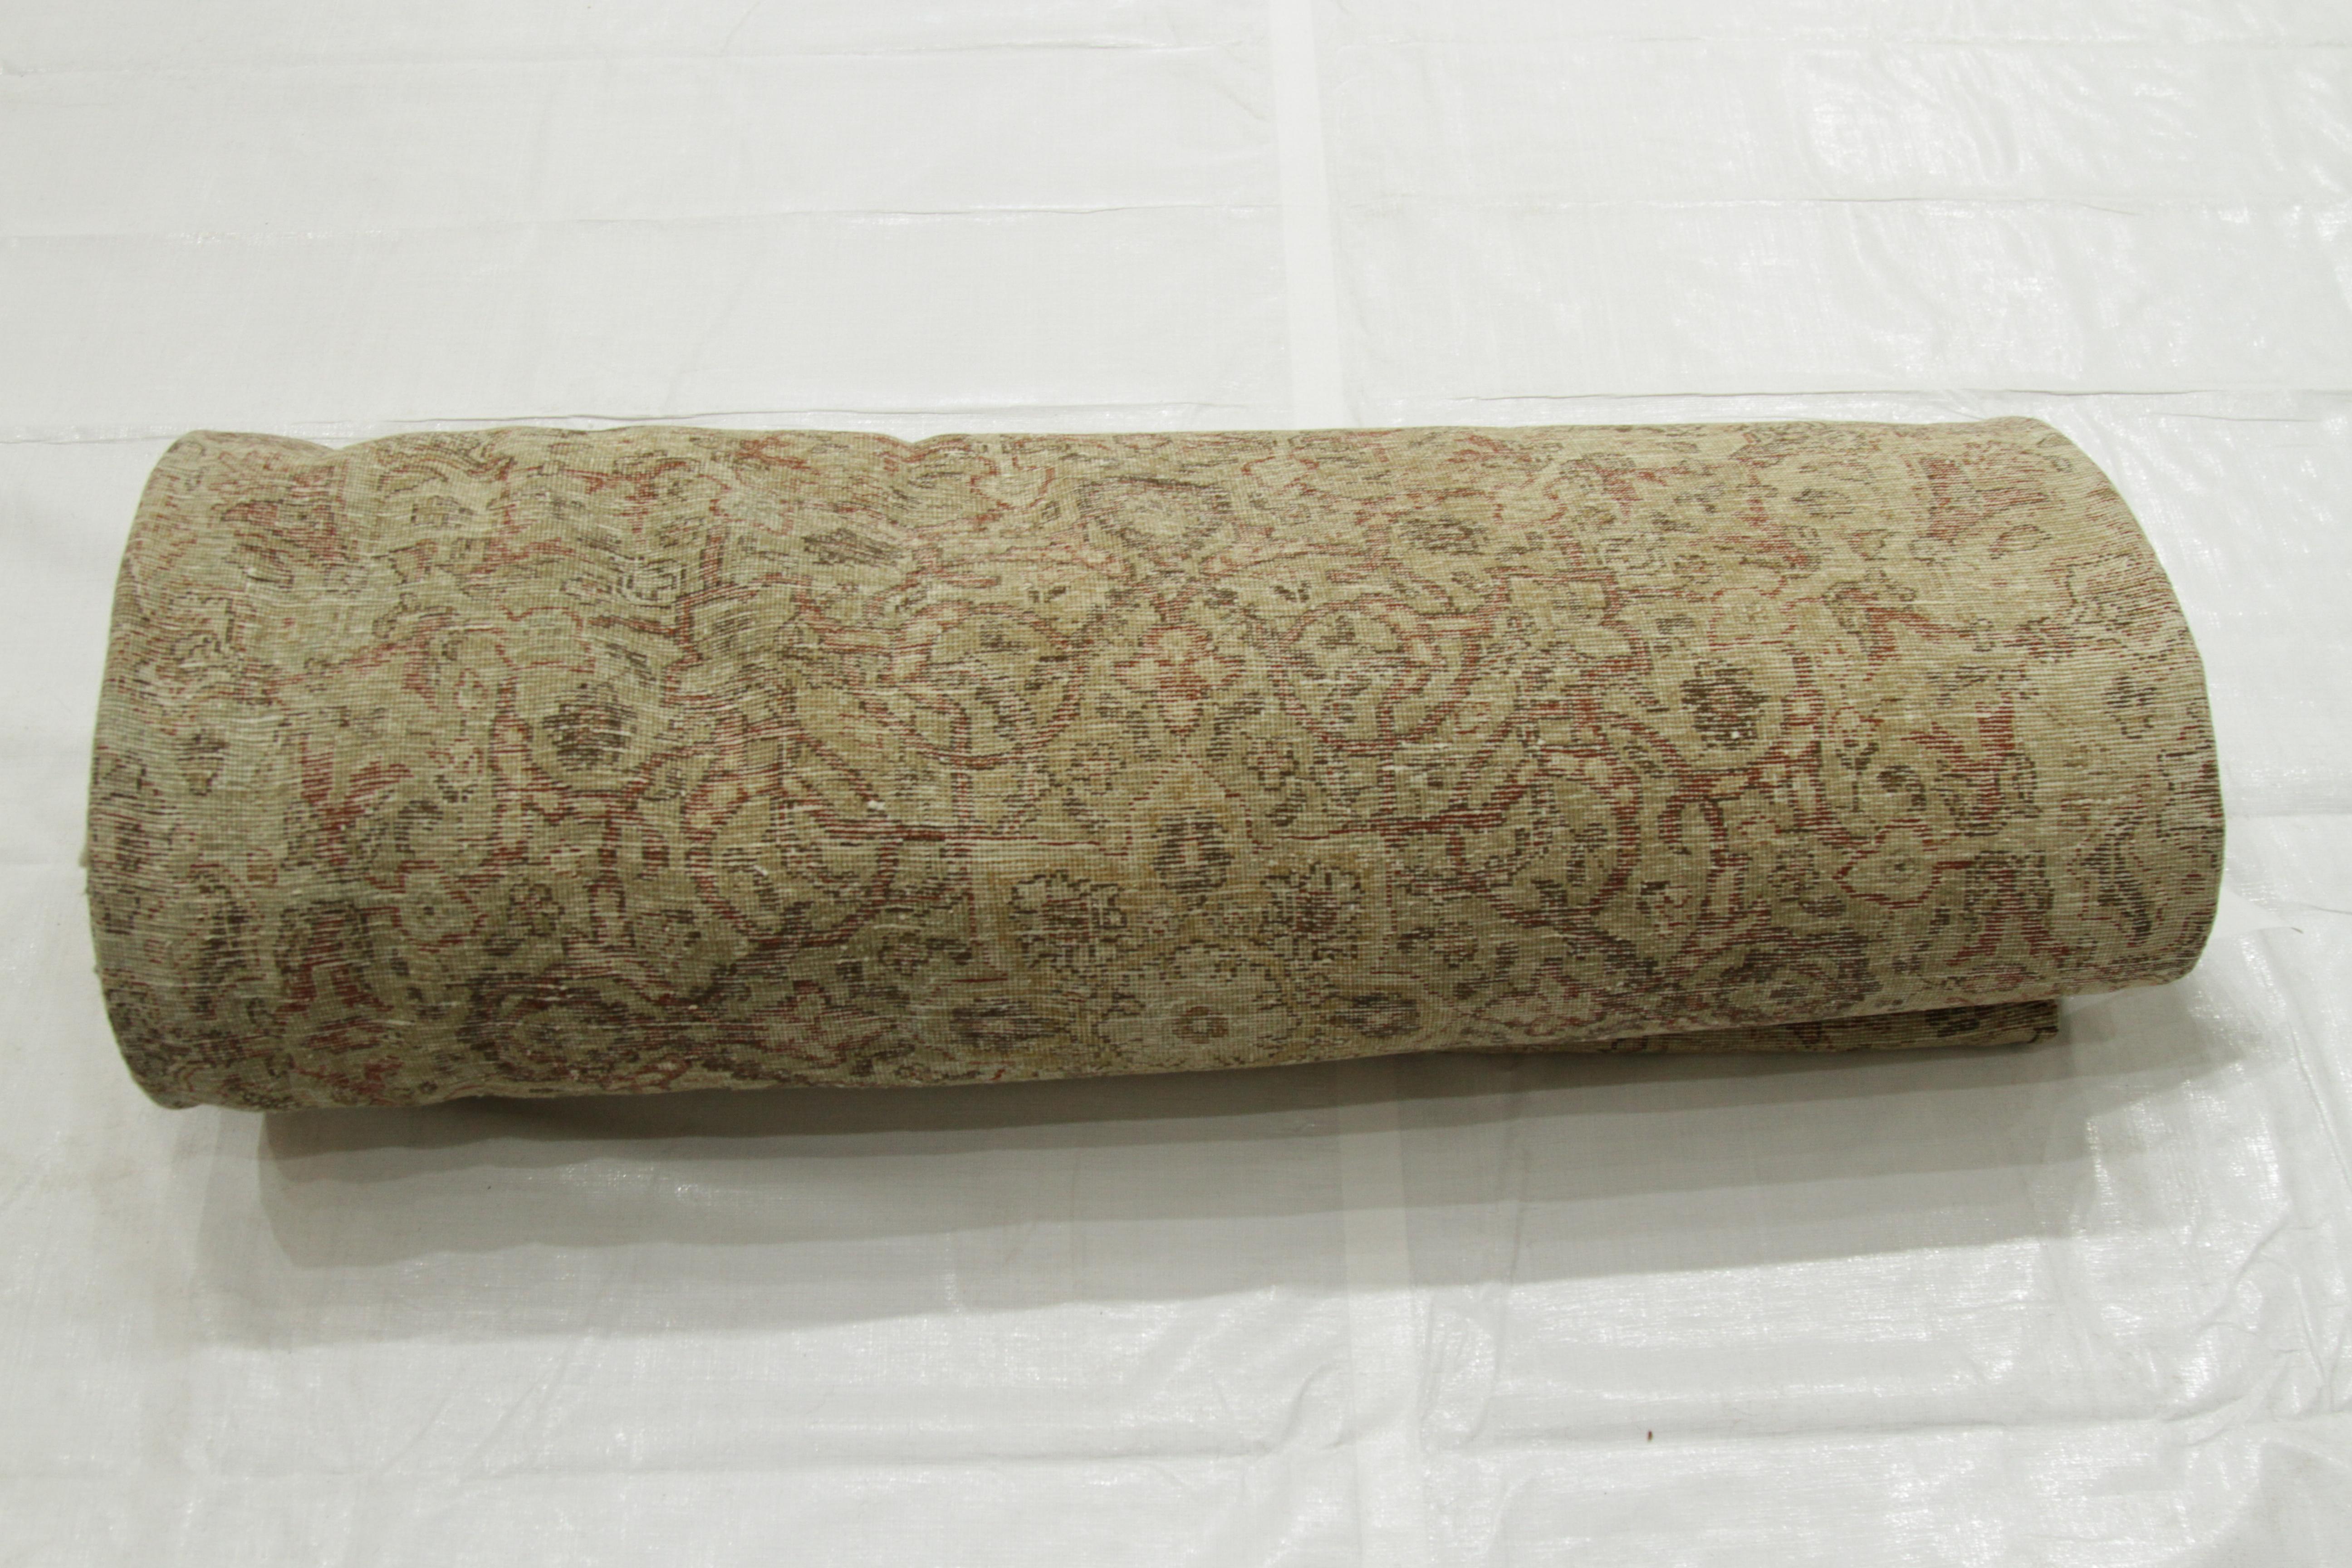  1930s Oversized Antique Persian Tabriz Rug with Ornate Tribal Patterns For Sale 4